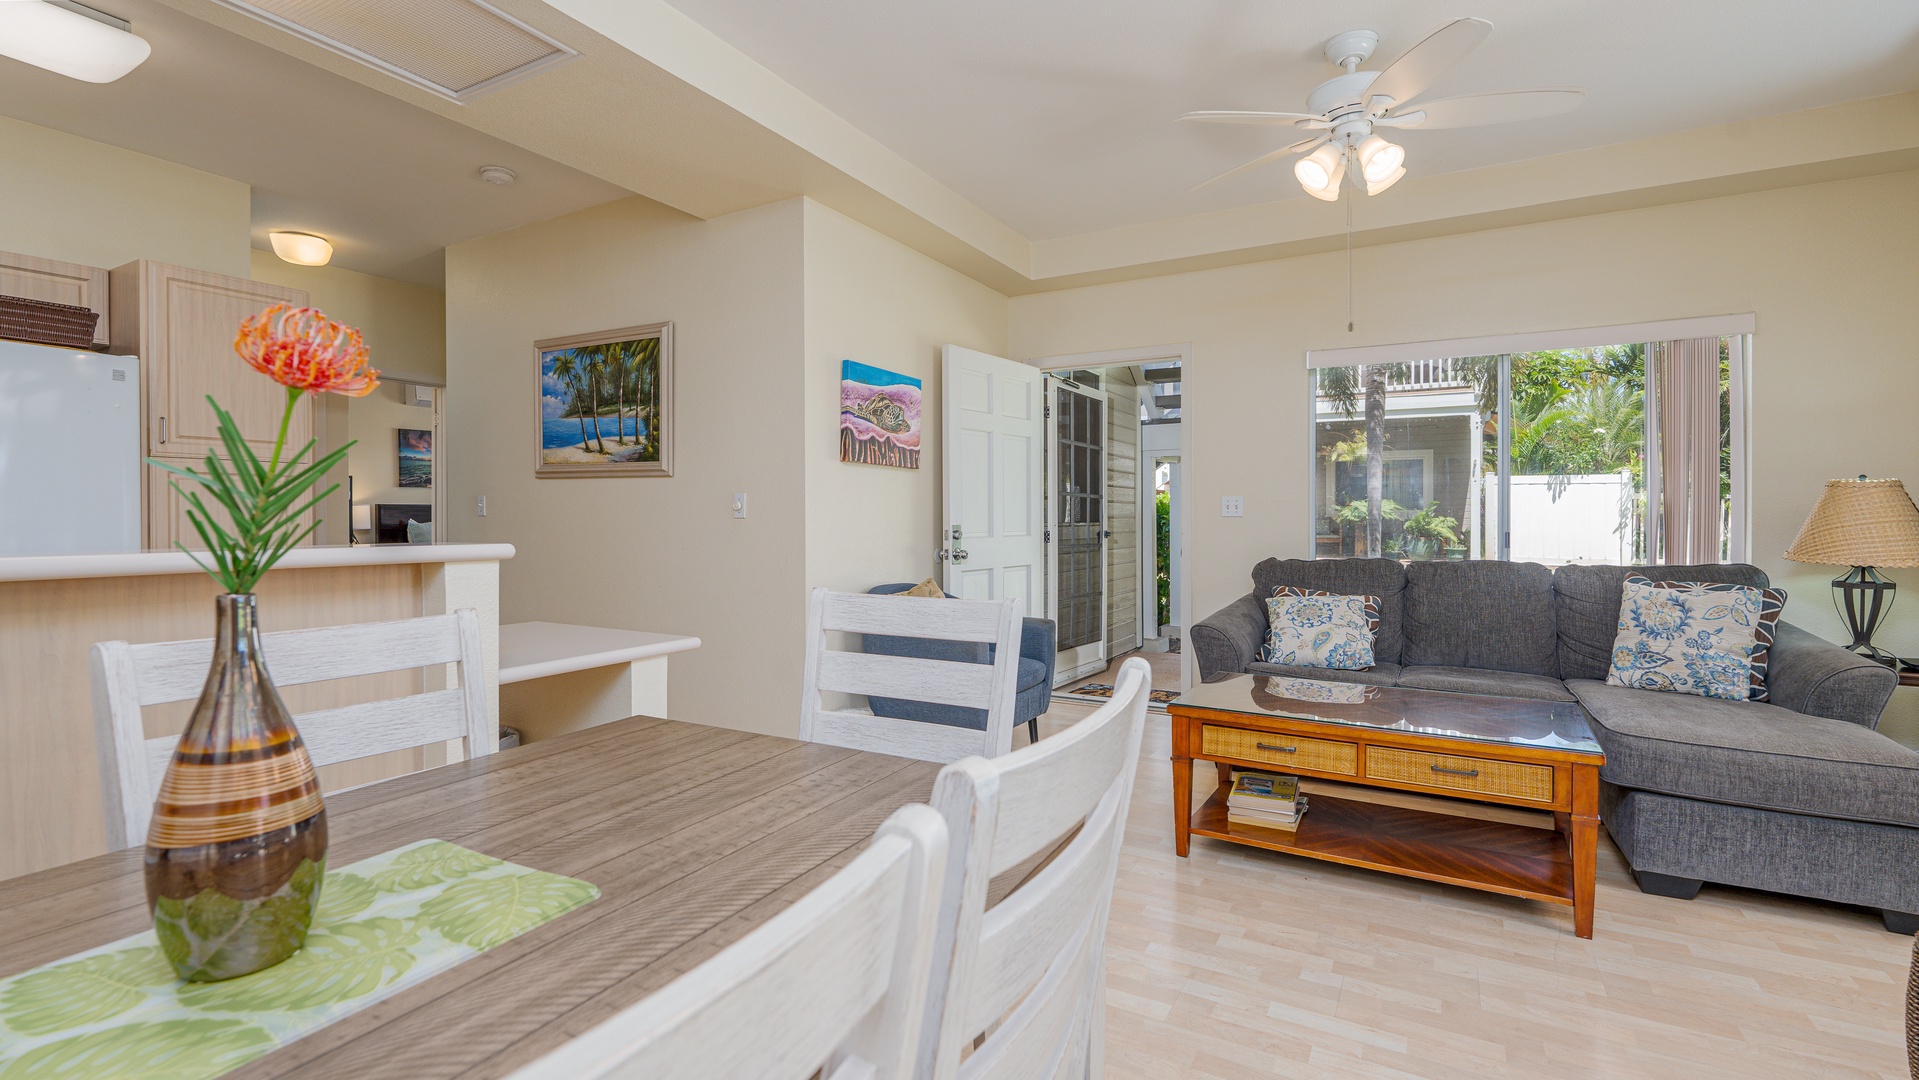 Kapolei Vacation Rentals, Fairways at Ko Olina 18C - Your beautiful home away from home.